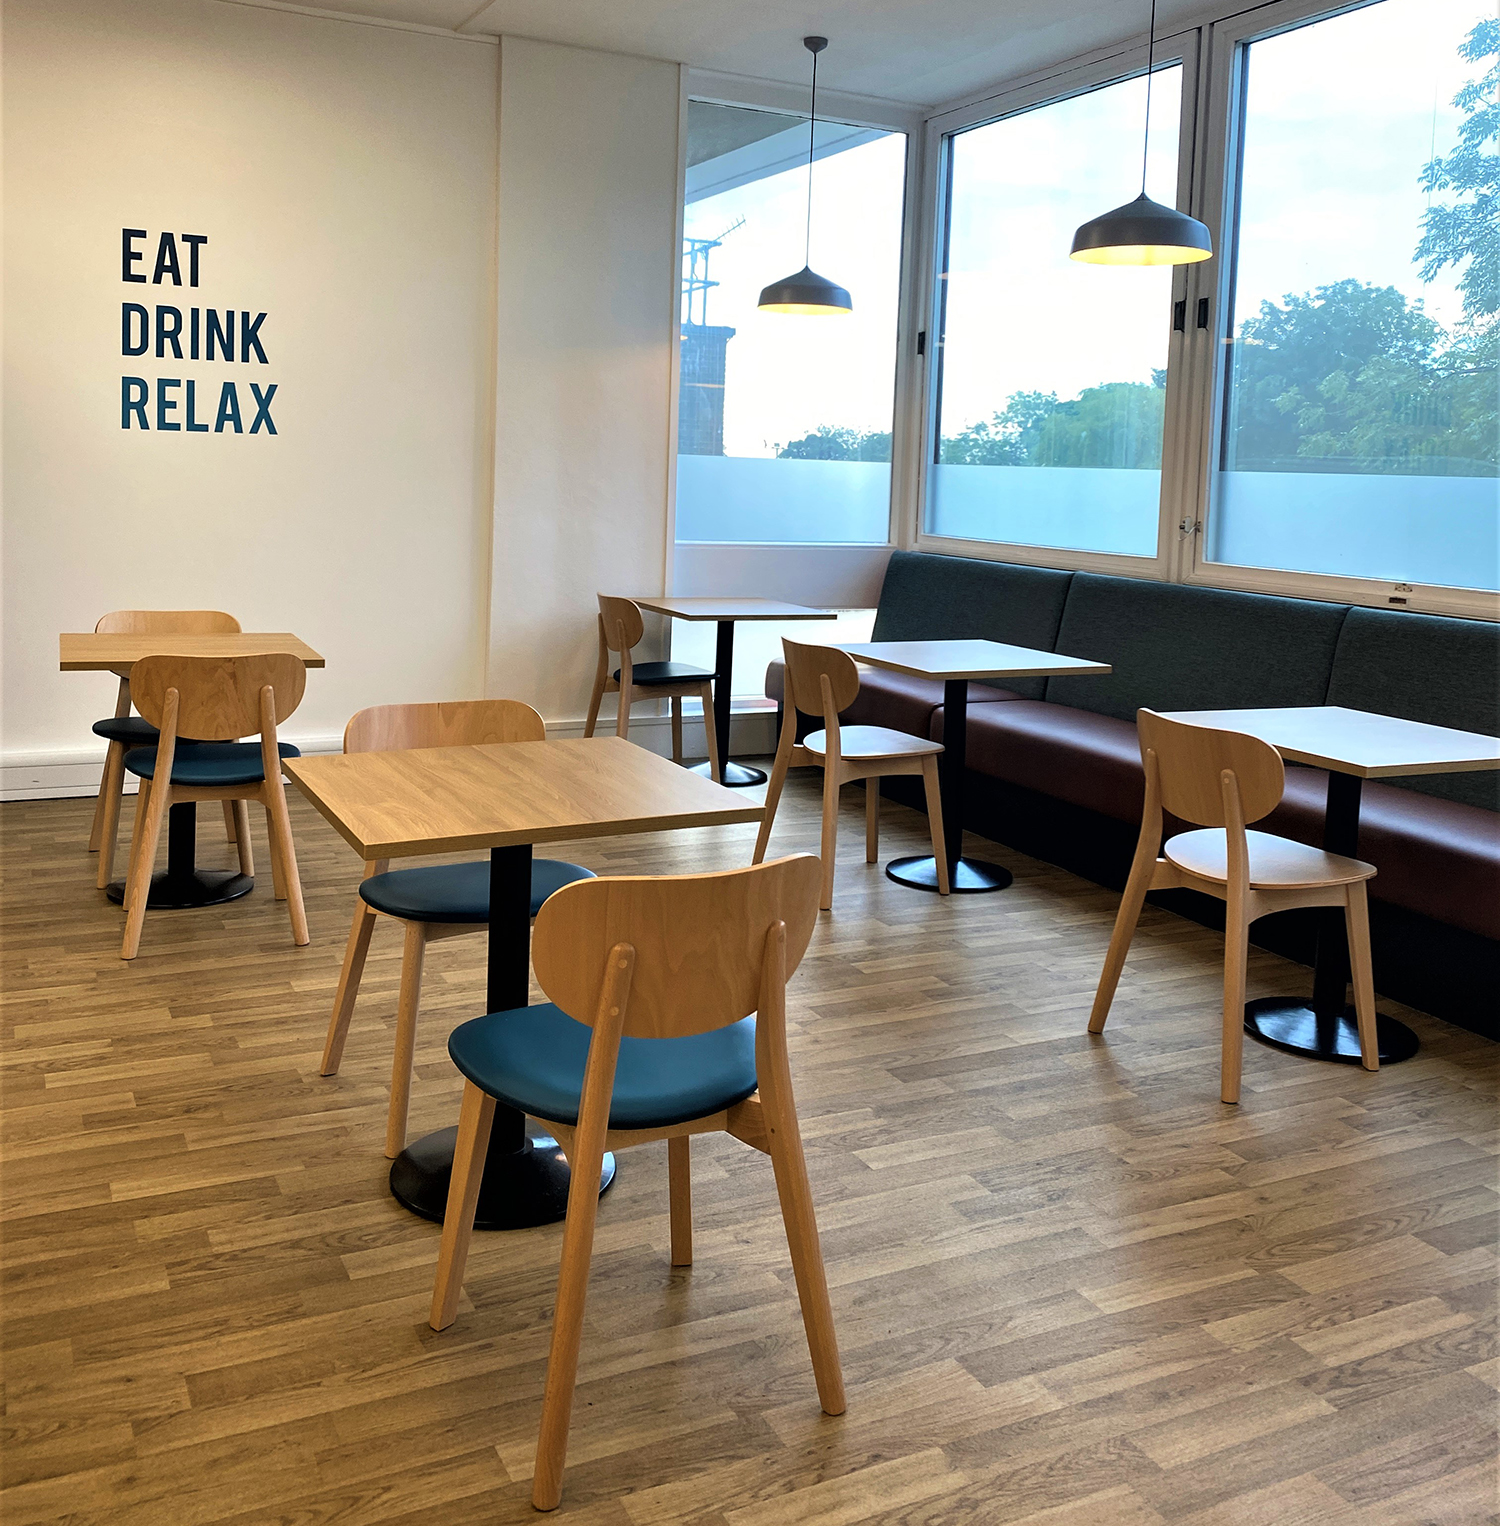 Southside Dining Area with the words EAT, DRINK, RELAX on the wall